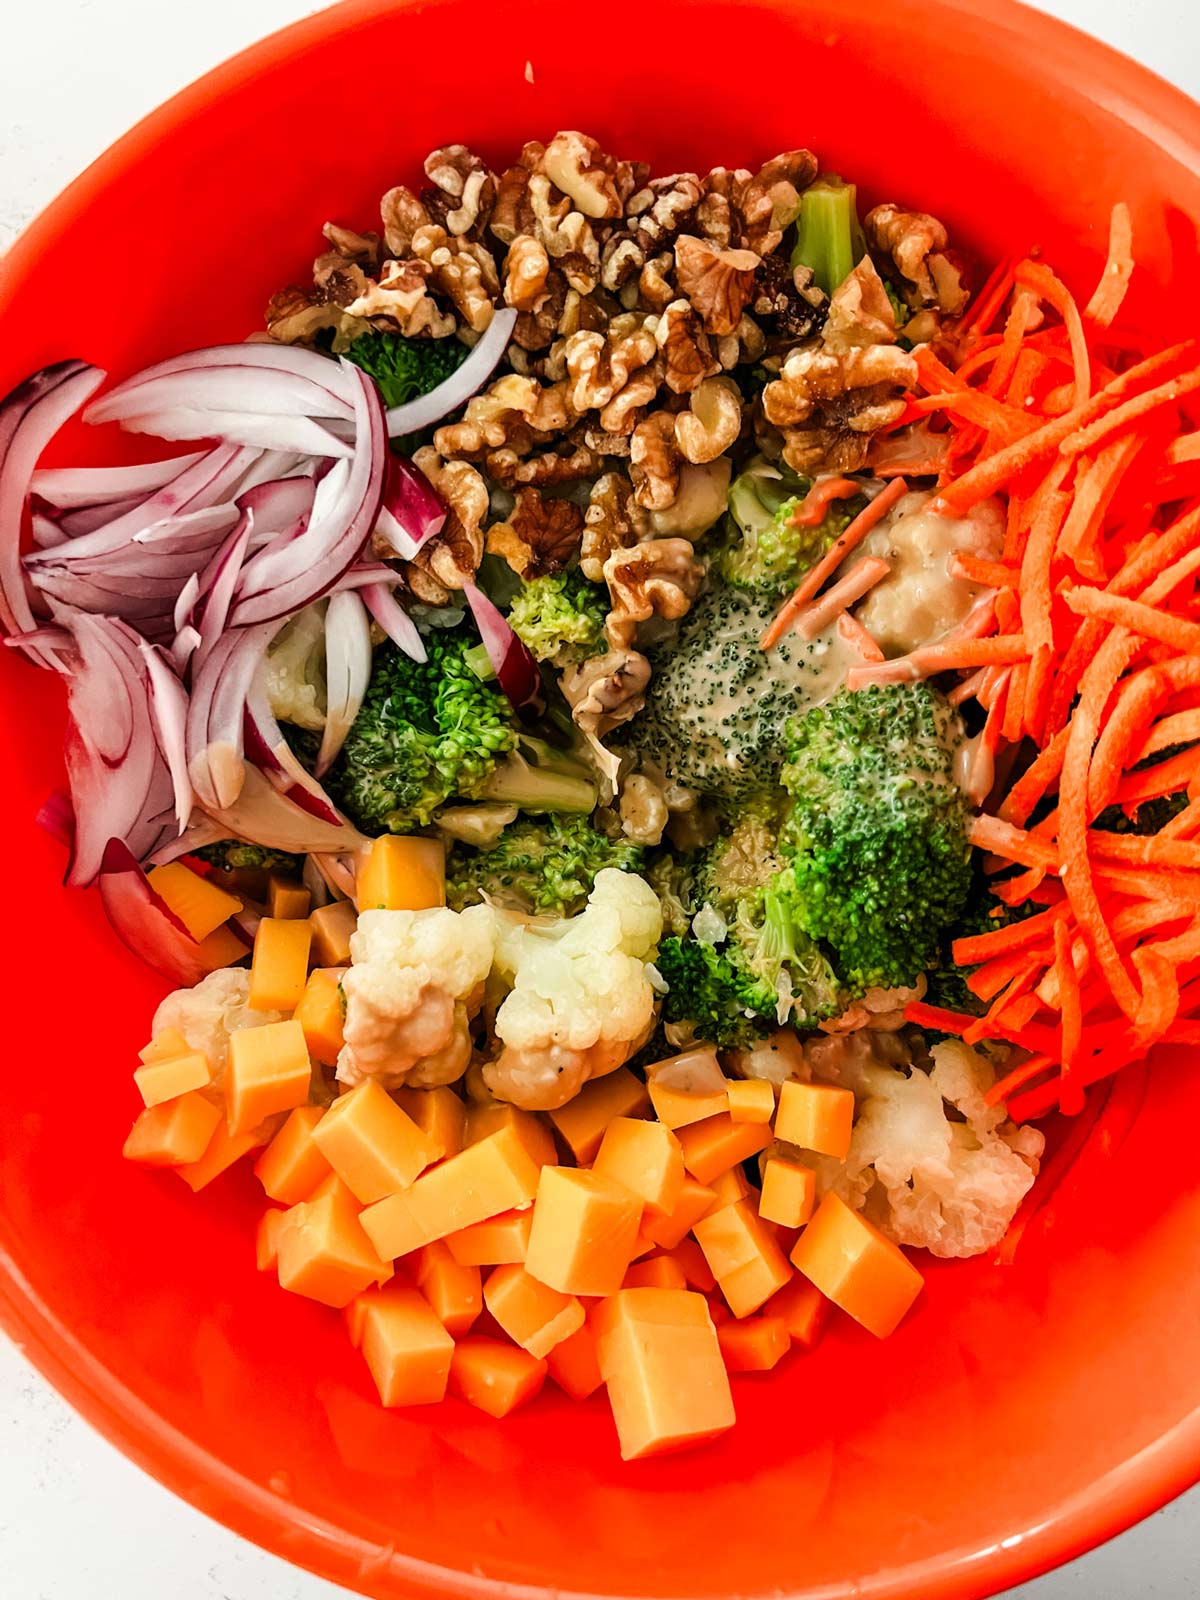 Cauliflower, broccoli, carrots, chopped cheese, onions, and walnut in a bowl with dressing.